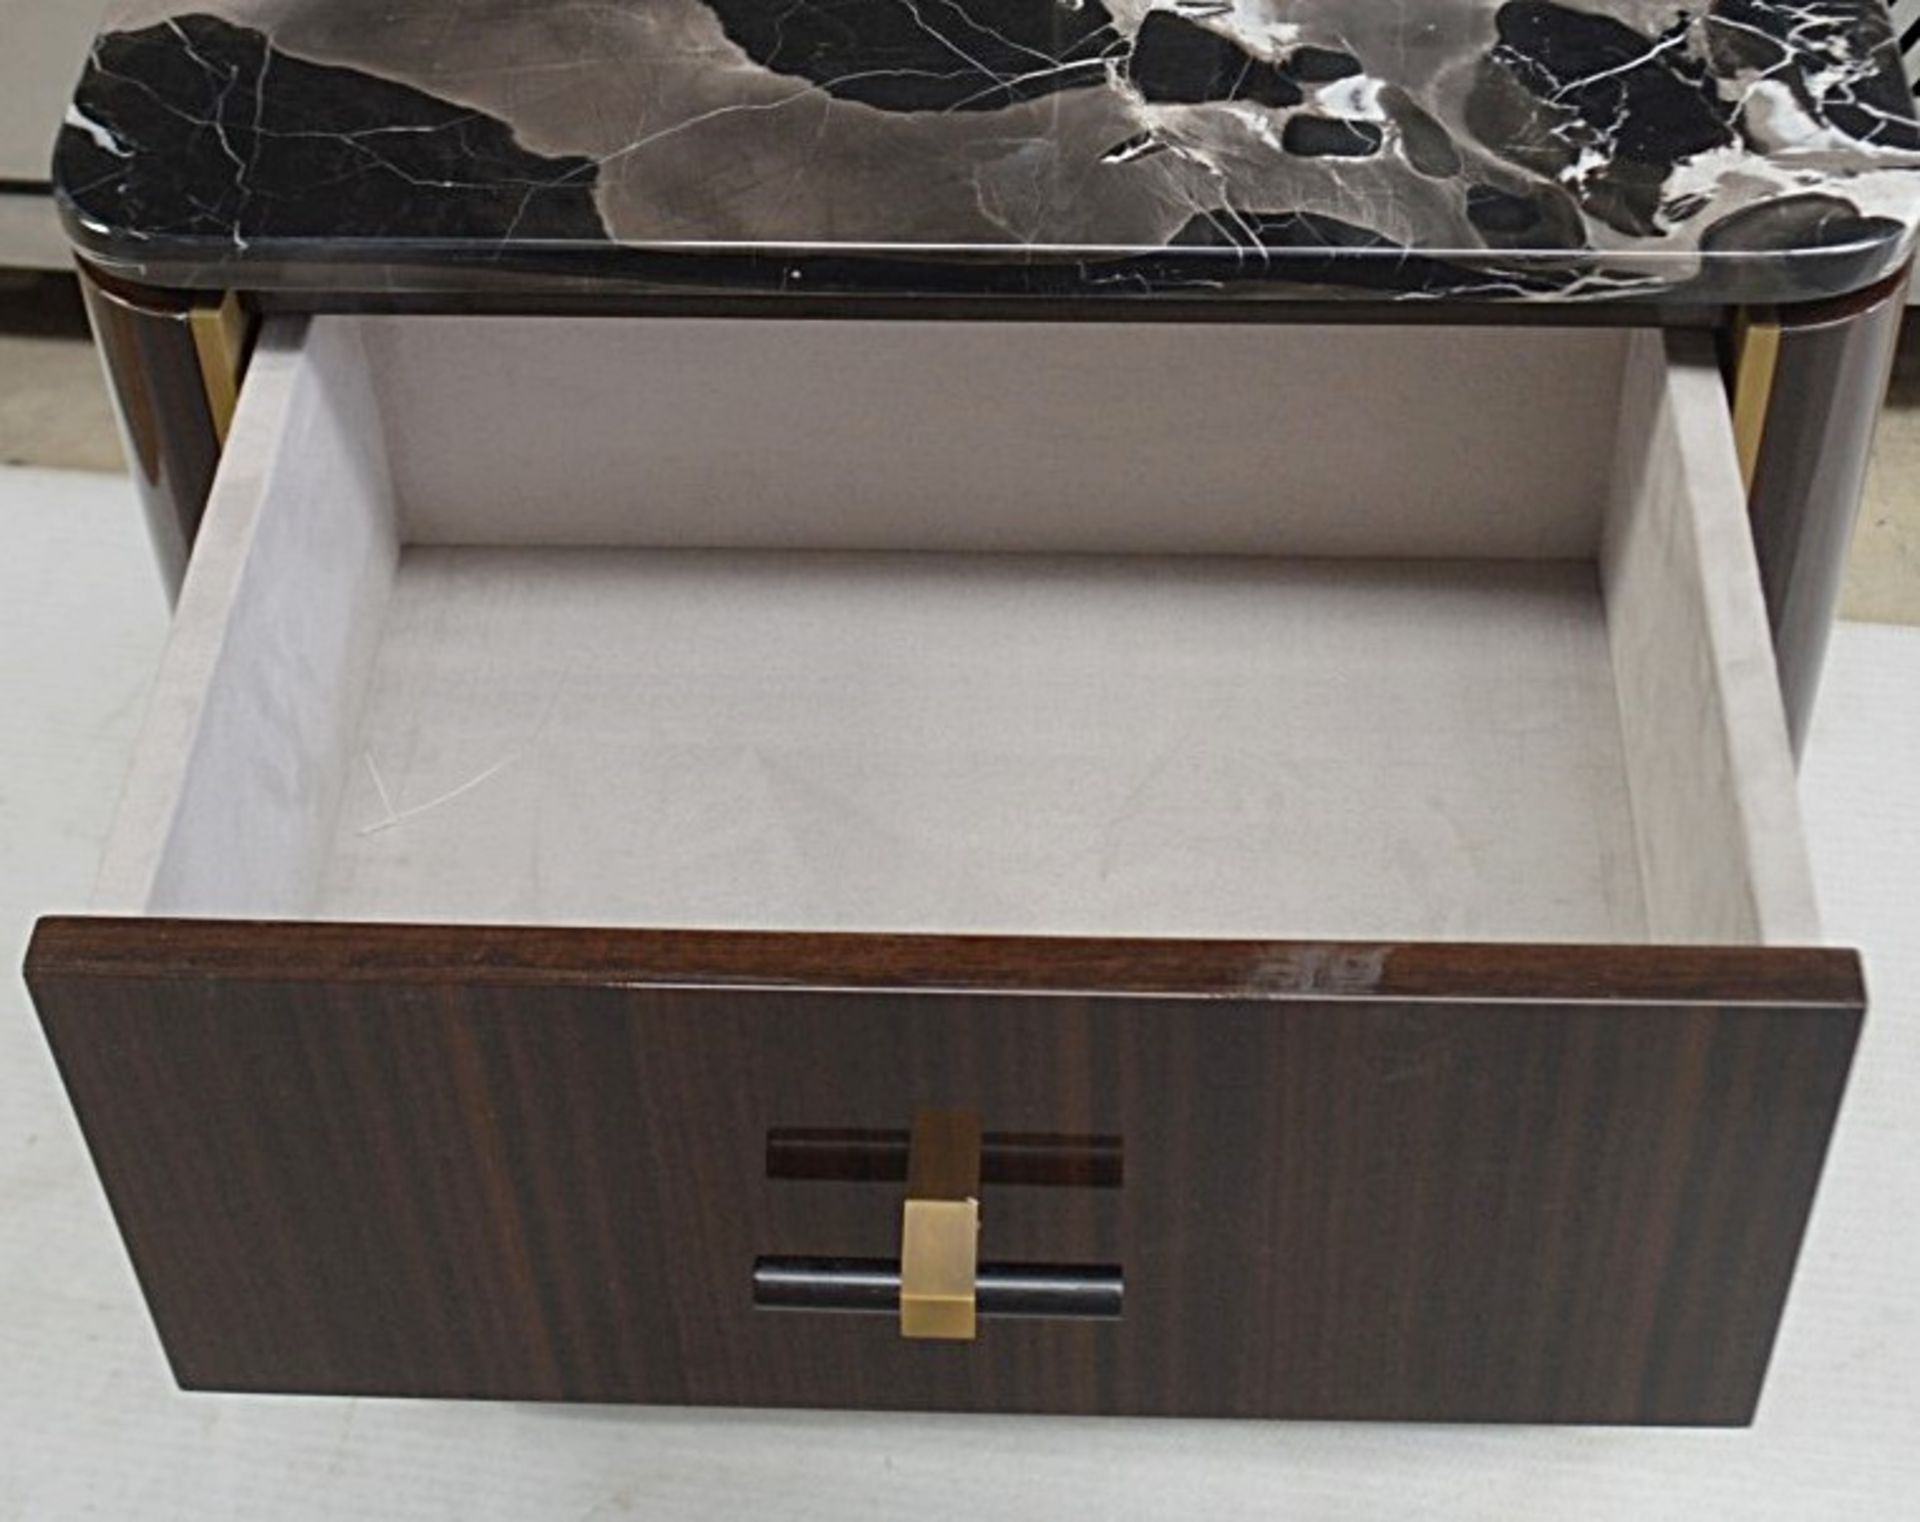 1 x FRATO 'BERNA' Luxury Designer Stone-topped Bedside Table With 3 Soft-close Lined Drawers - Image 6 of 7